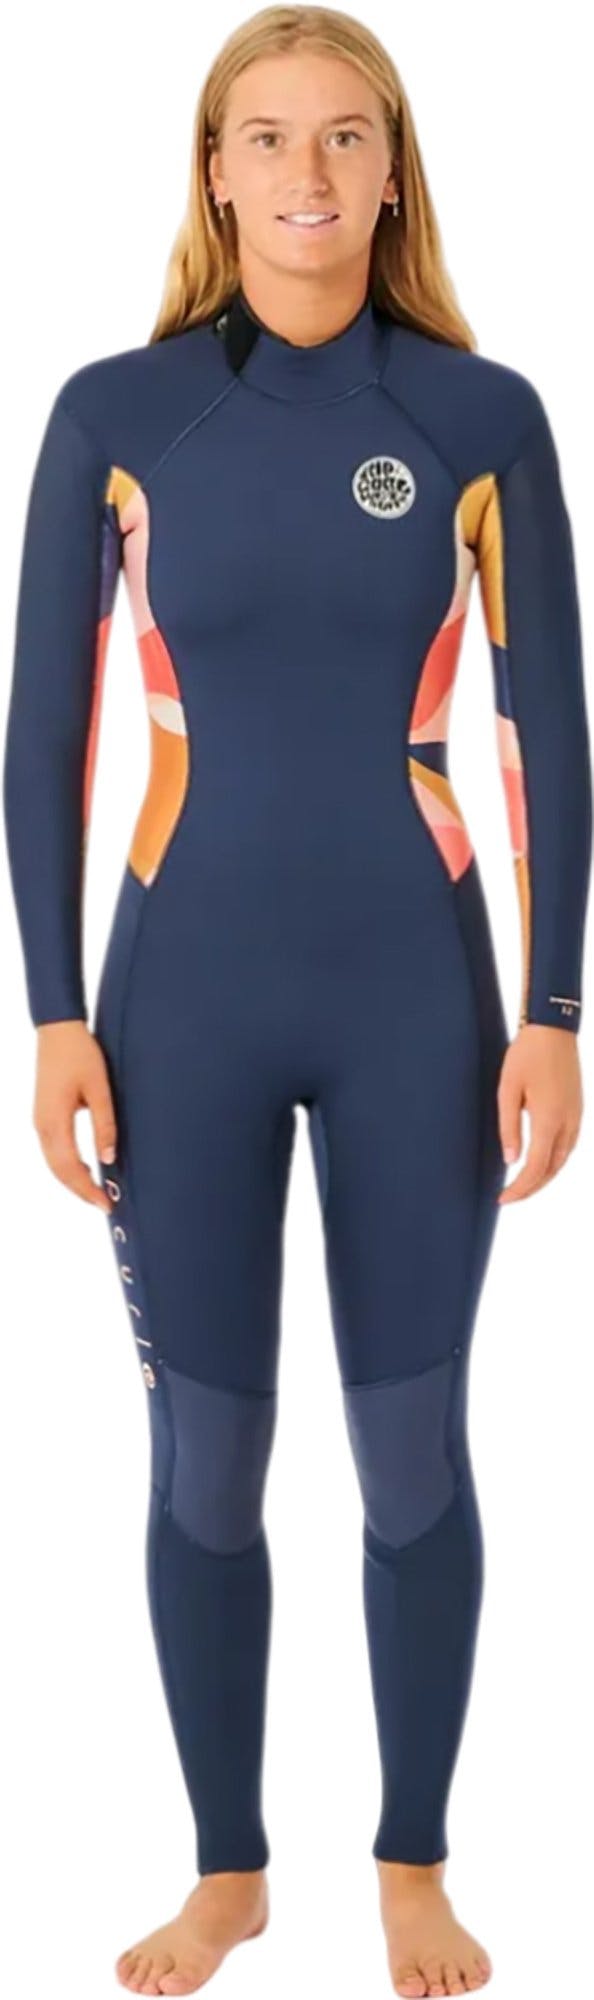 Product image for Dawn Patrol 3/2 Back Zip Wetsuit - Women's